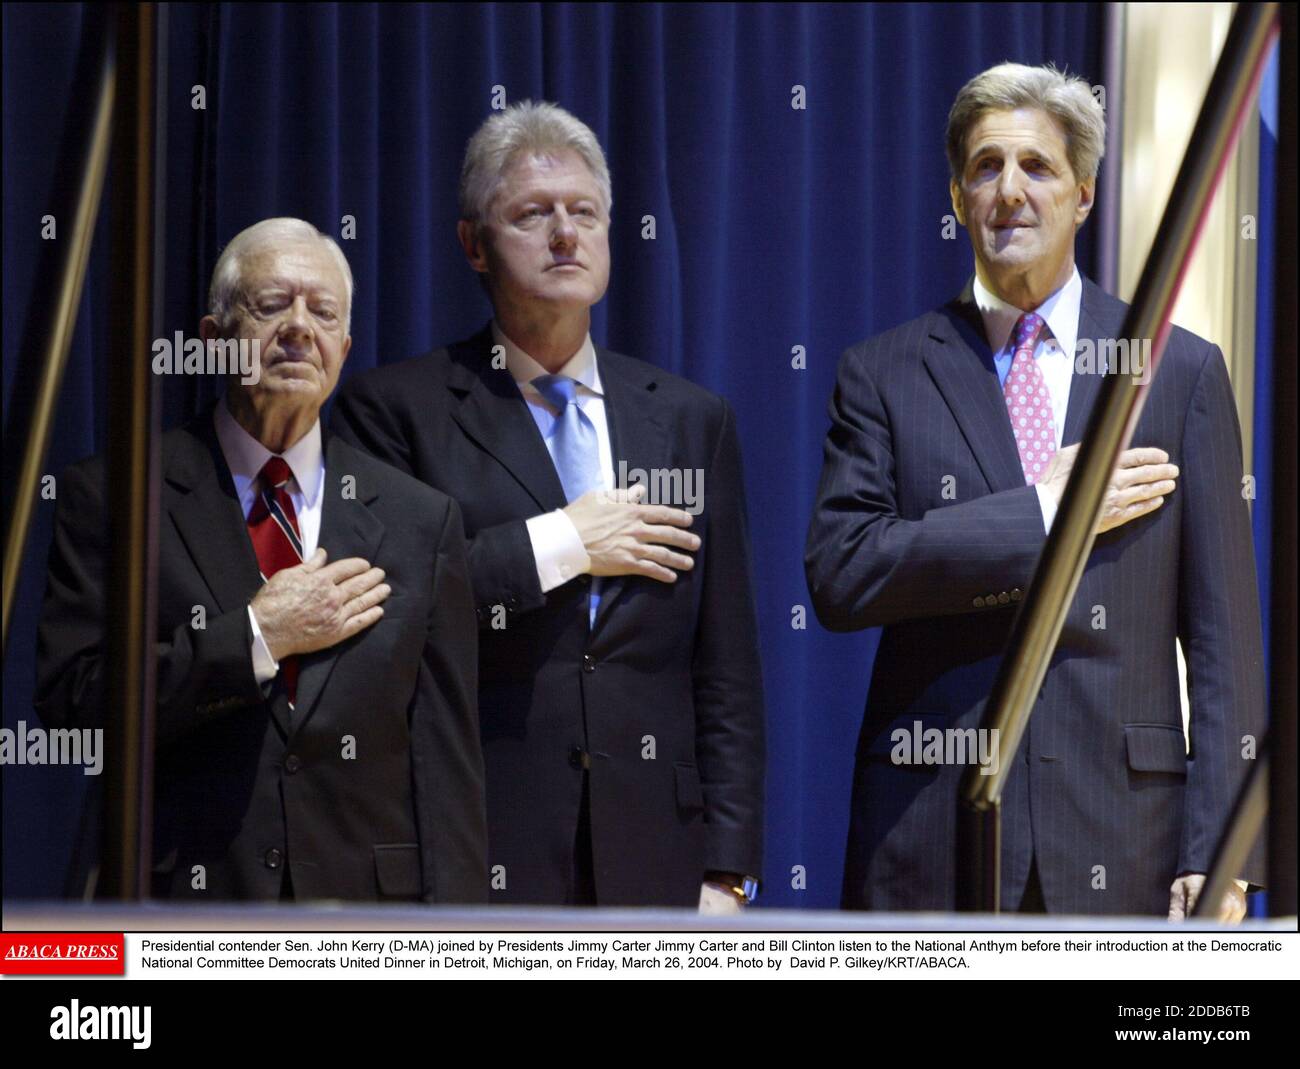 NO FILM, NO VIDEO, NO TV, NO DOCUMENTARY - Presidential contender Sen. John Kerry (D-MA) joined by Presidents Jimmy Carter Jimmy Carter and Bill Clinton listen to the National Anthym before their introduction at the Democratic National Committee Democrats United Dinner in Detroit, Michigan, on Friday, March 26, 2004. Photo by David P. Gilkey/KRT/ABACA. Stock Photo